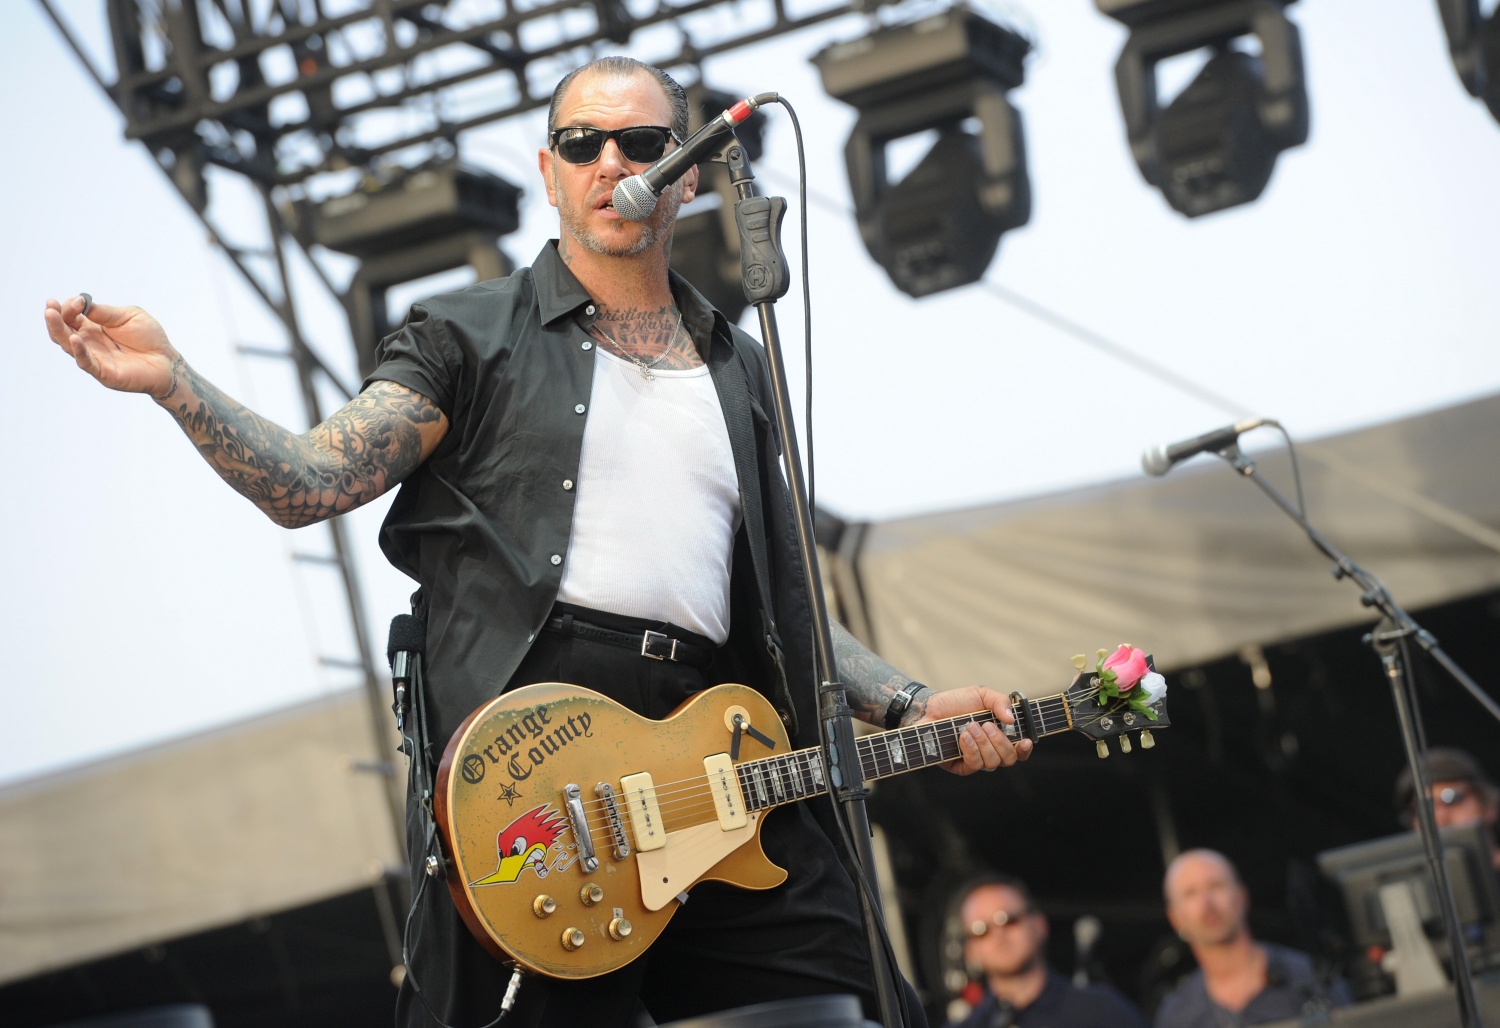 Mike Ness of the band Social Distortion performs onstage during day 3 of the 2013 Coachella Valley Music & Arts Festival at the Empire Polo Club on April 14, 2013 in Indio, California.